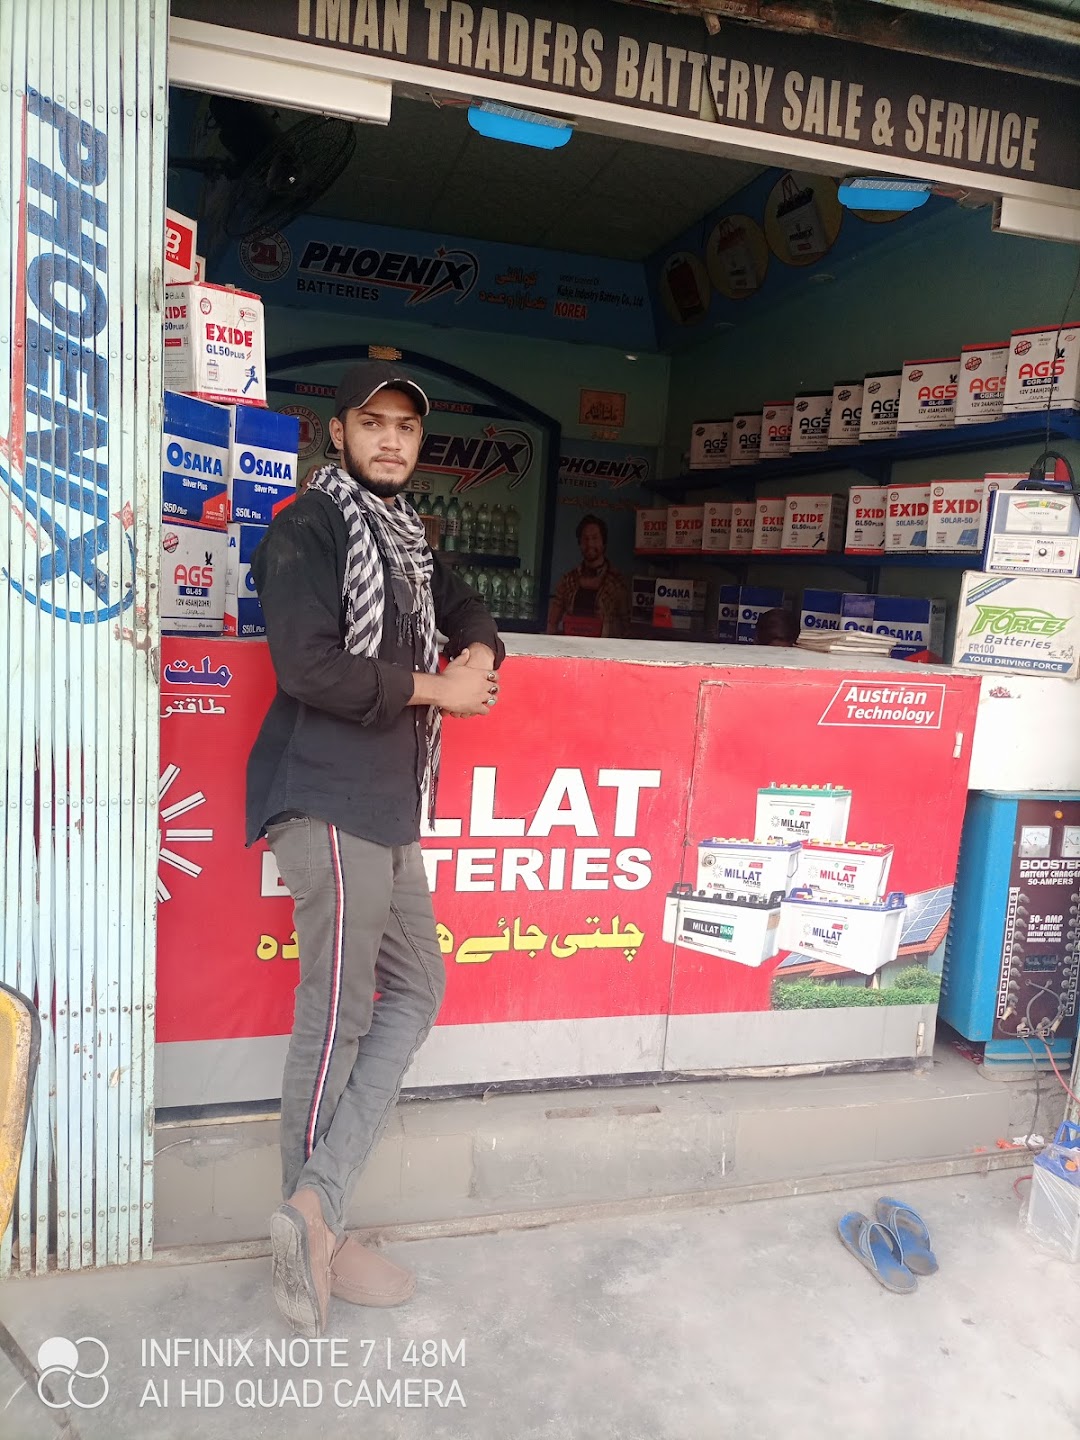 Ahmed Brothers Battery service